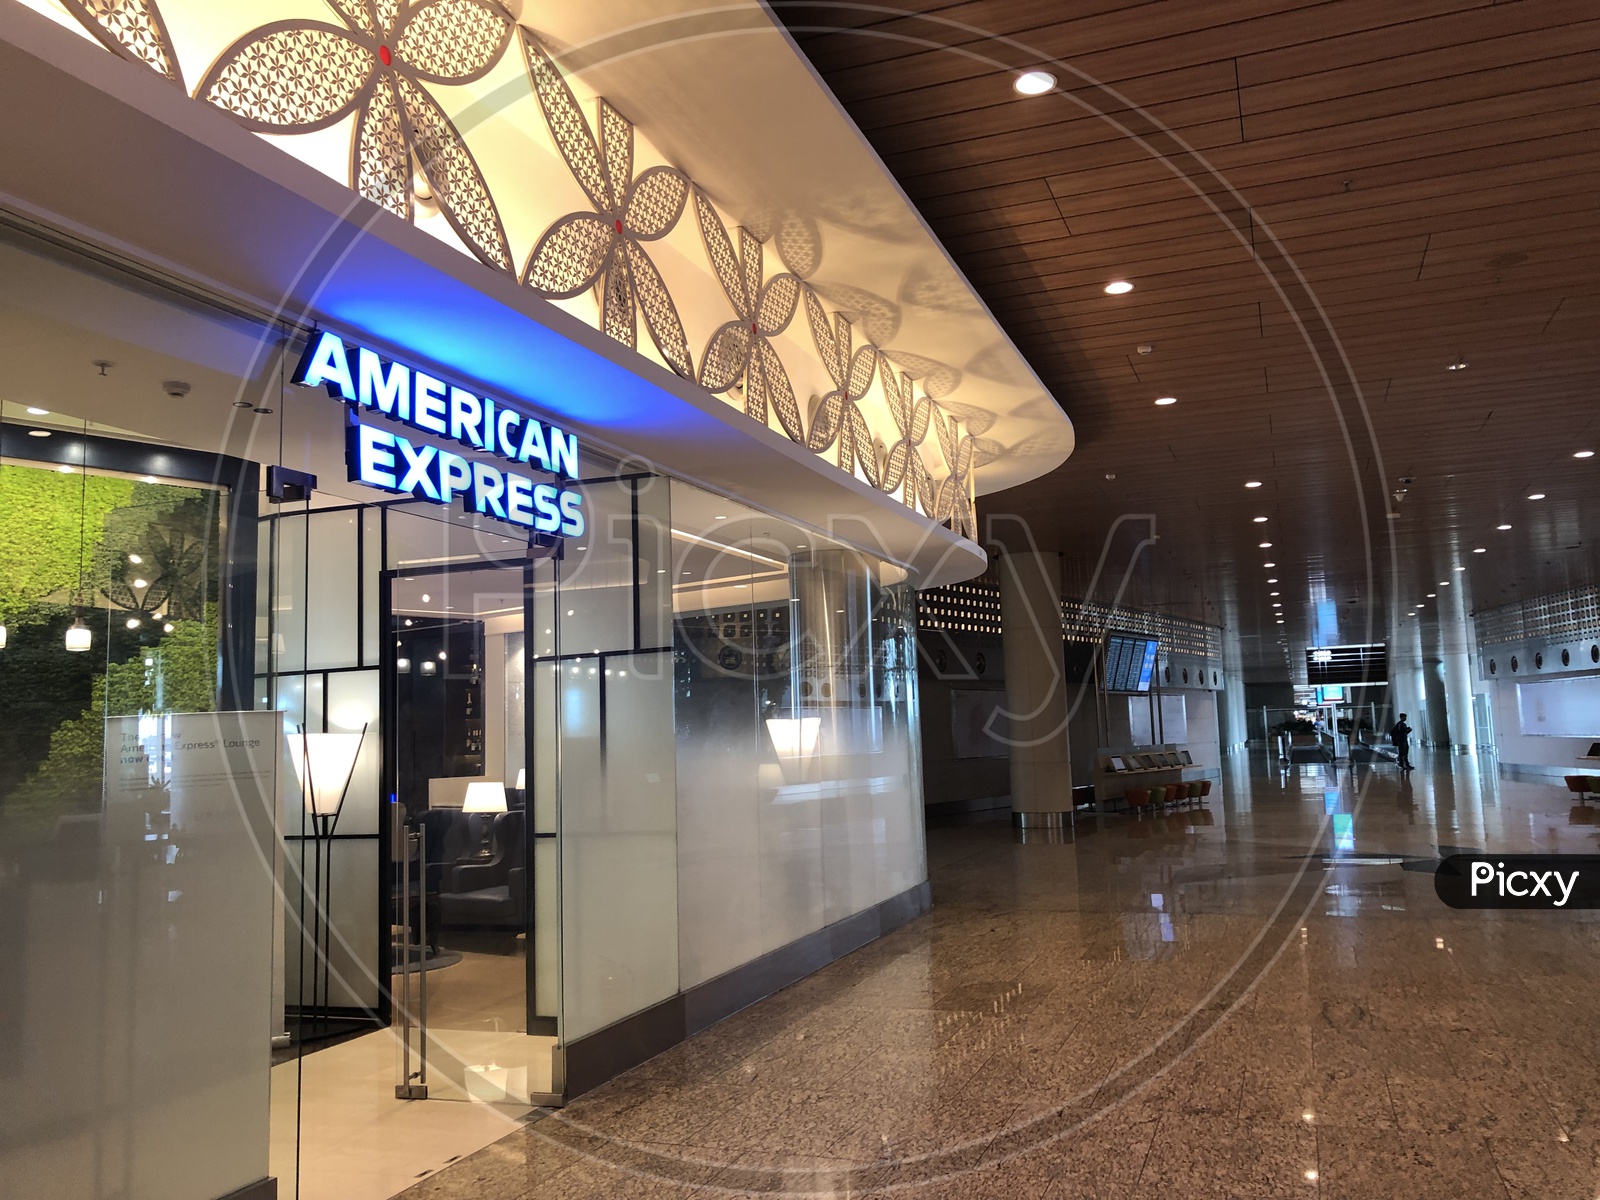 American Express Passenger  Waiting Lounges in Airport Terminals